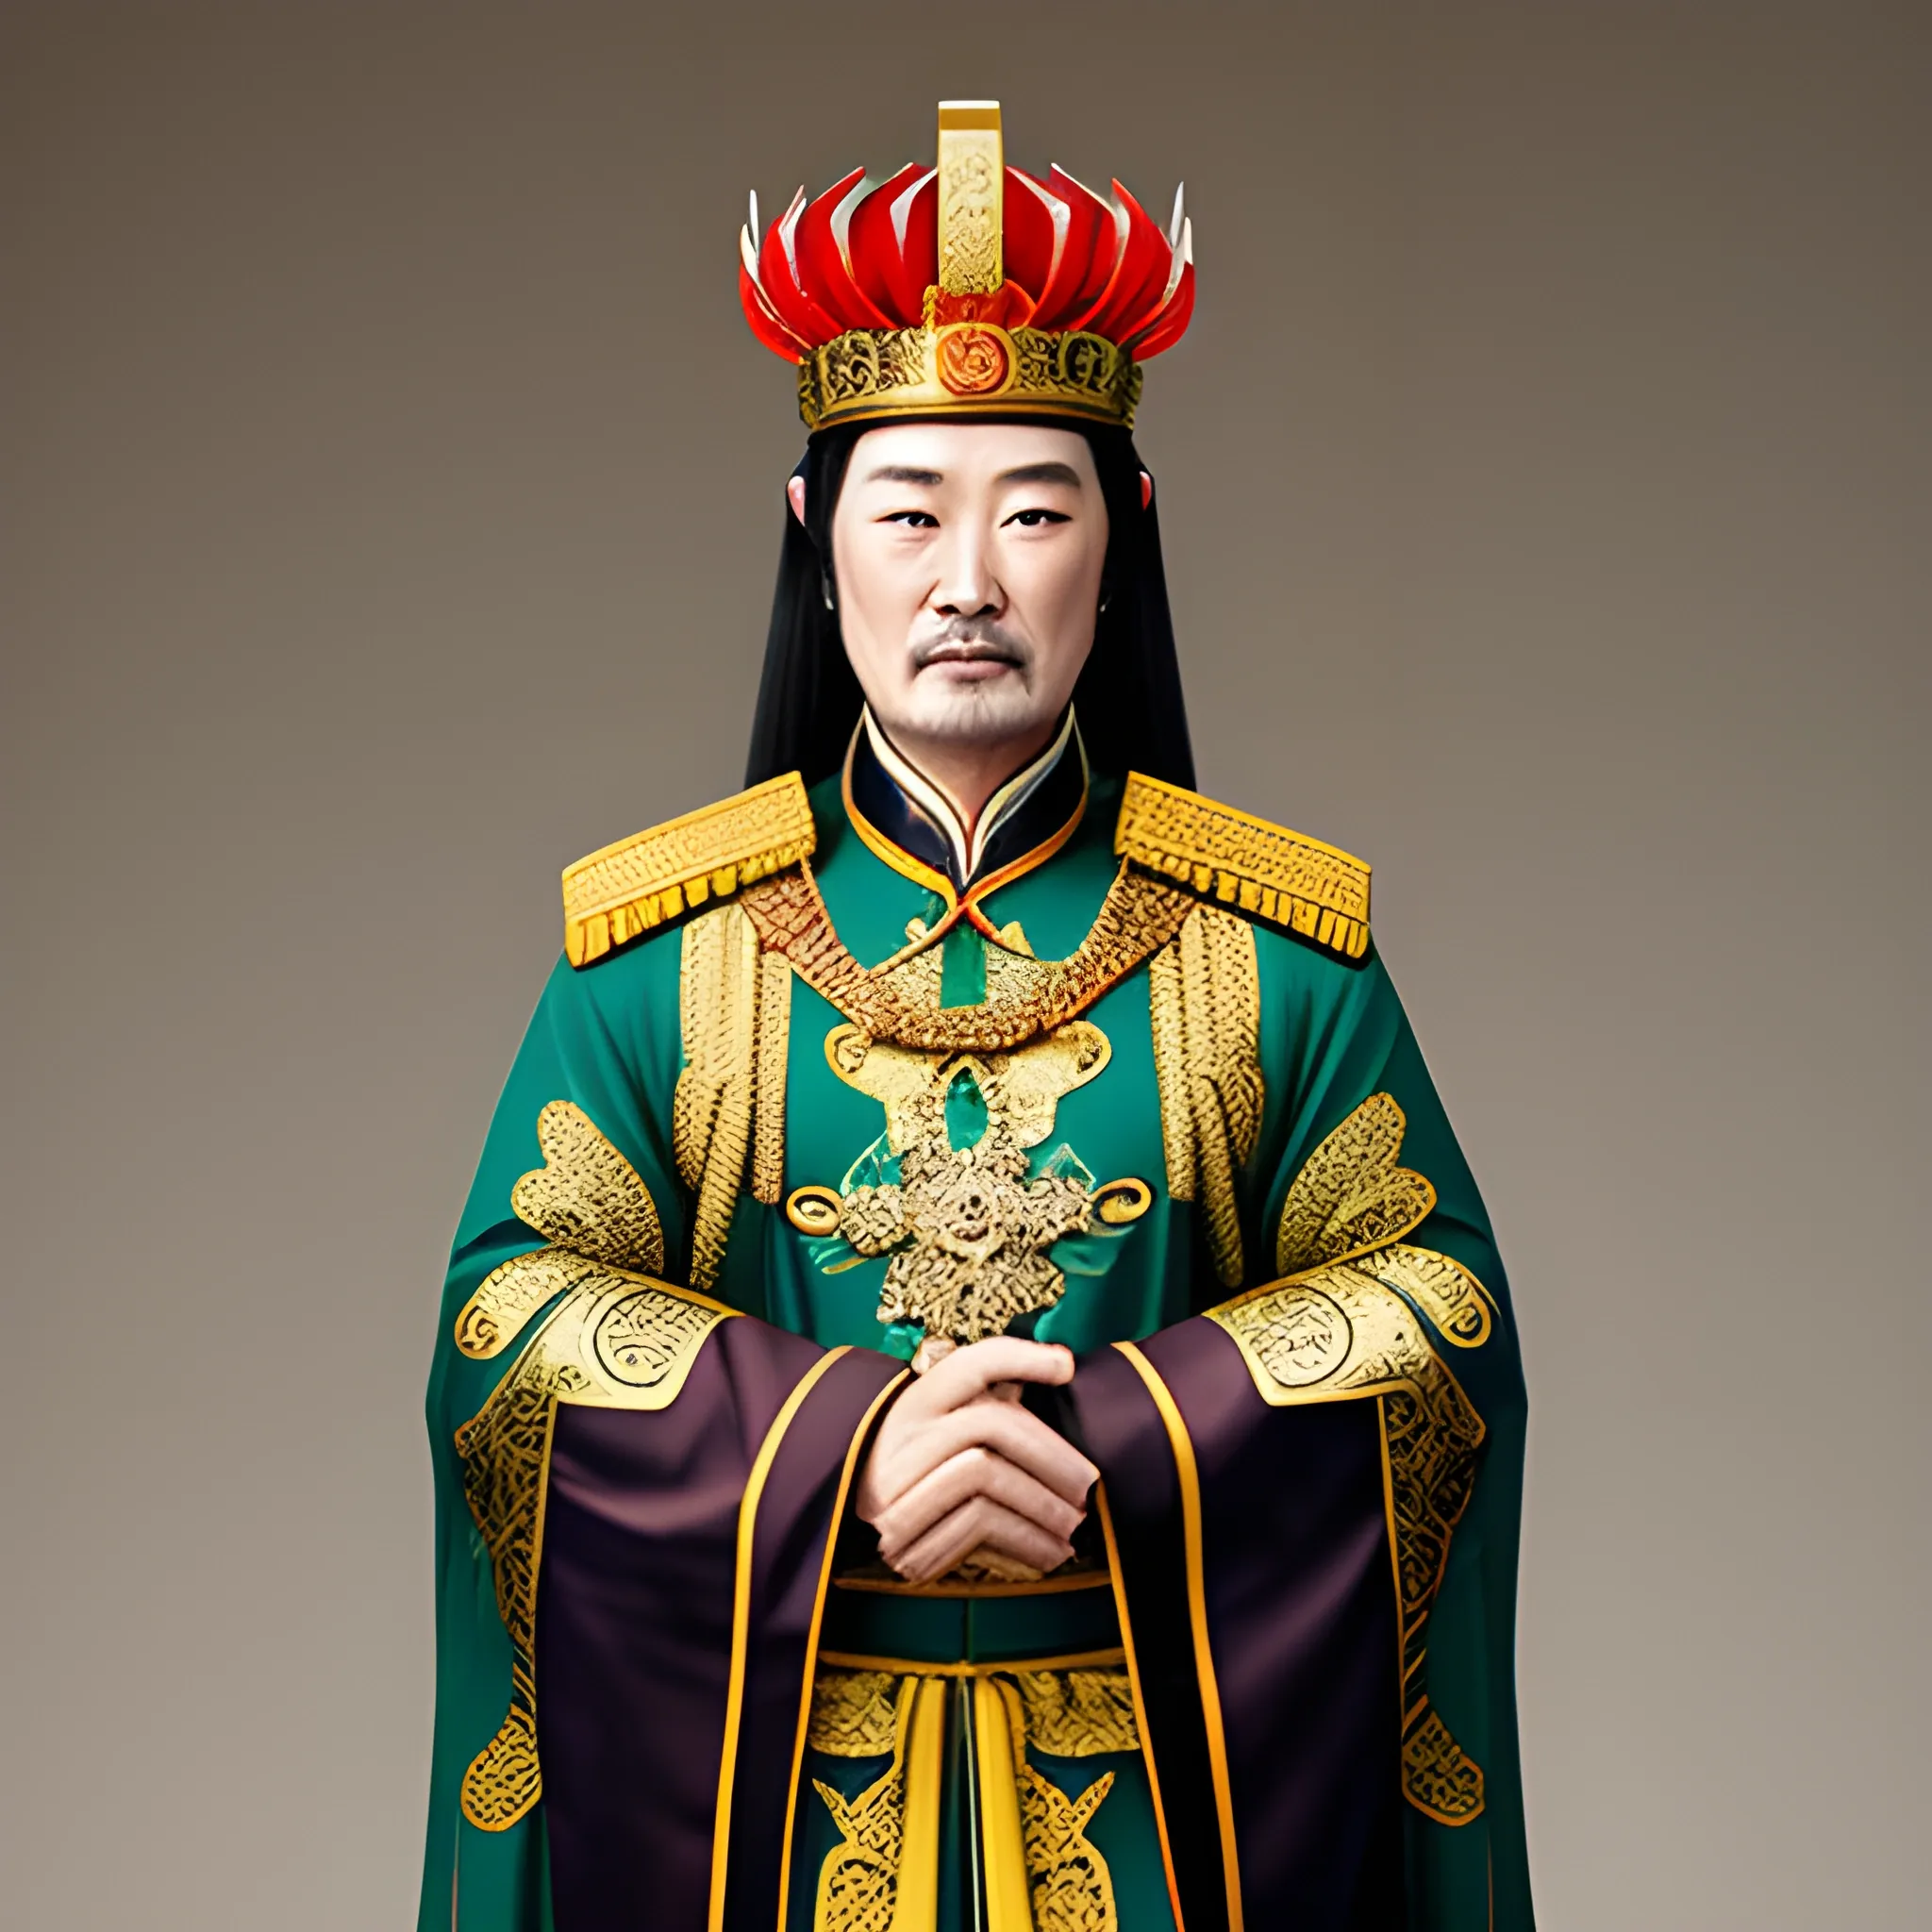 young Chinese king is crowned

, Cartoon